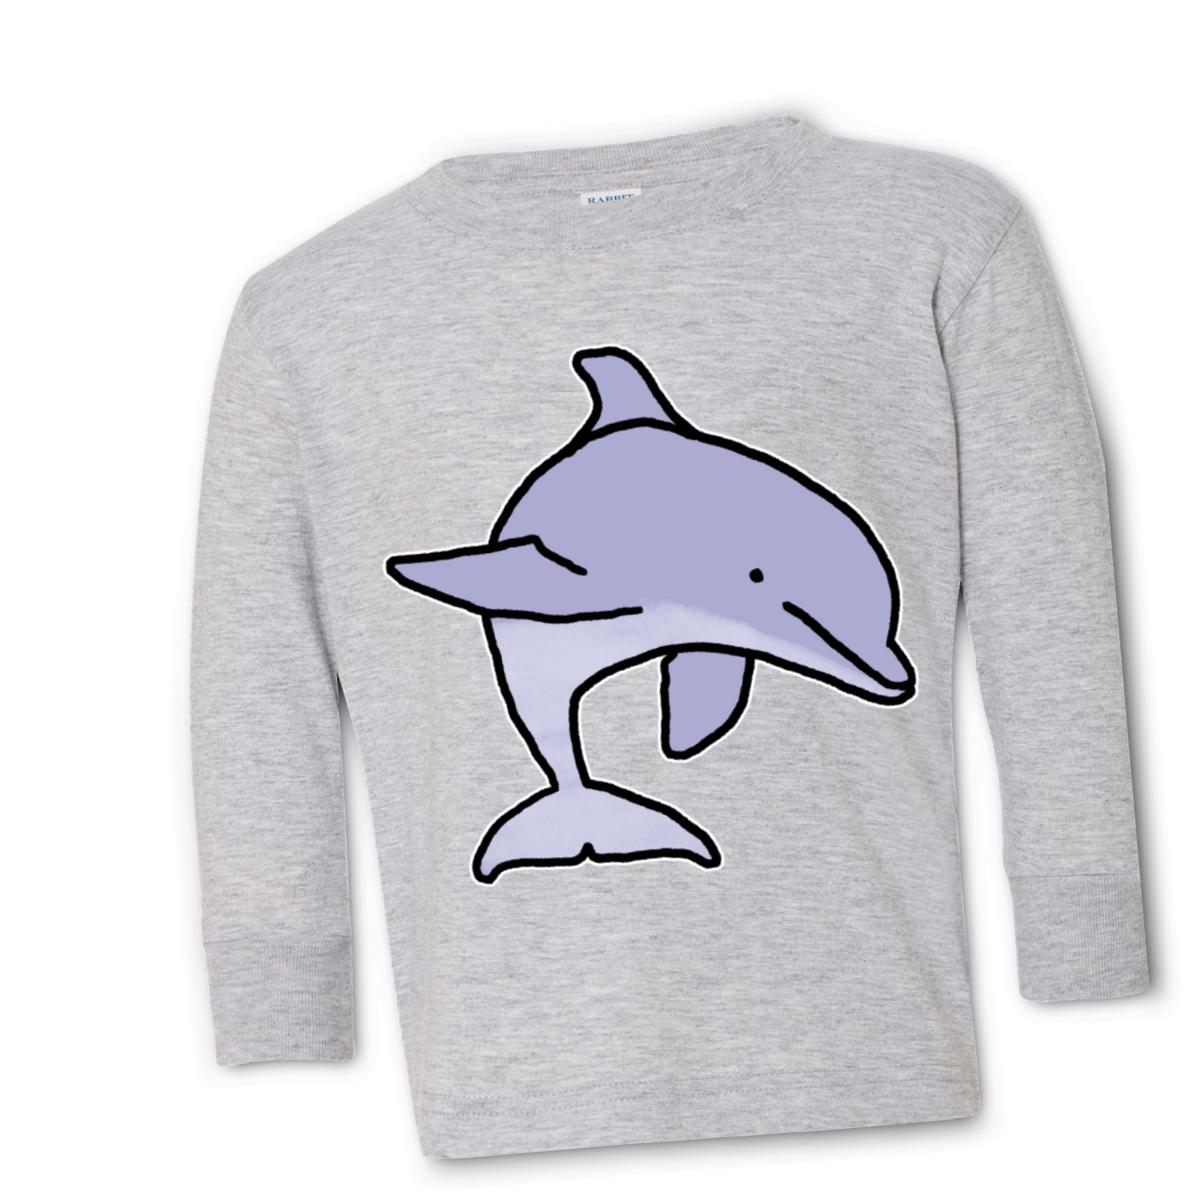 Dolphin Toddler Long Sleeve Tee 2T heather